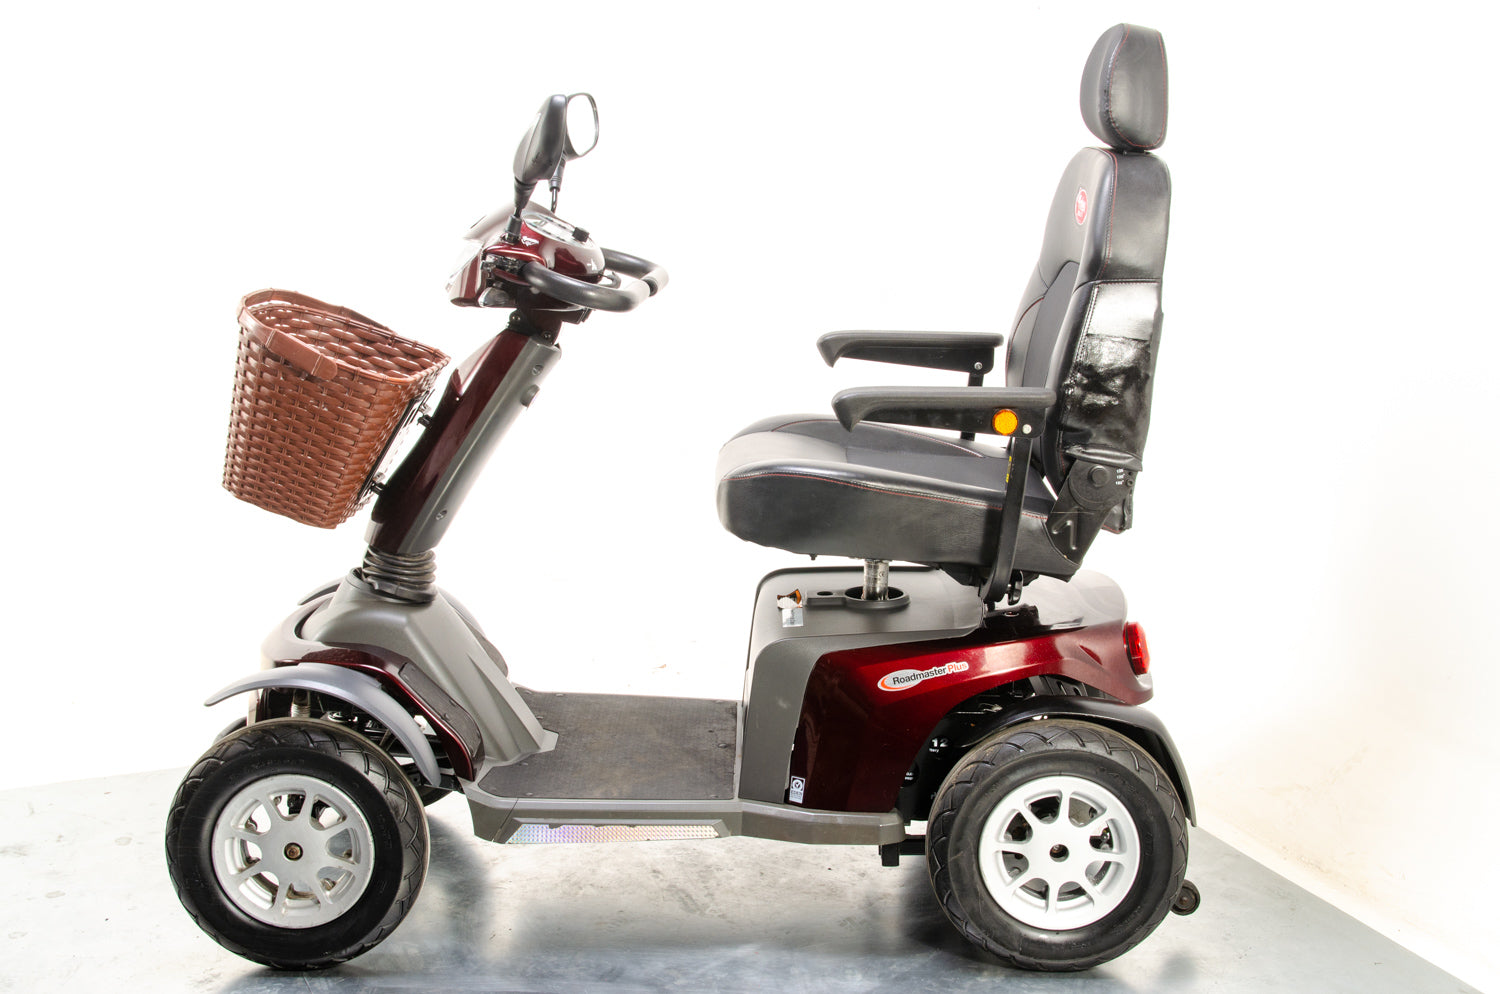 Eden Roadmaster Plus All-Terrain Off-Road Used Mobility Scooter 8mph ATV Luxury Electric Large 13978